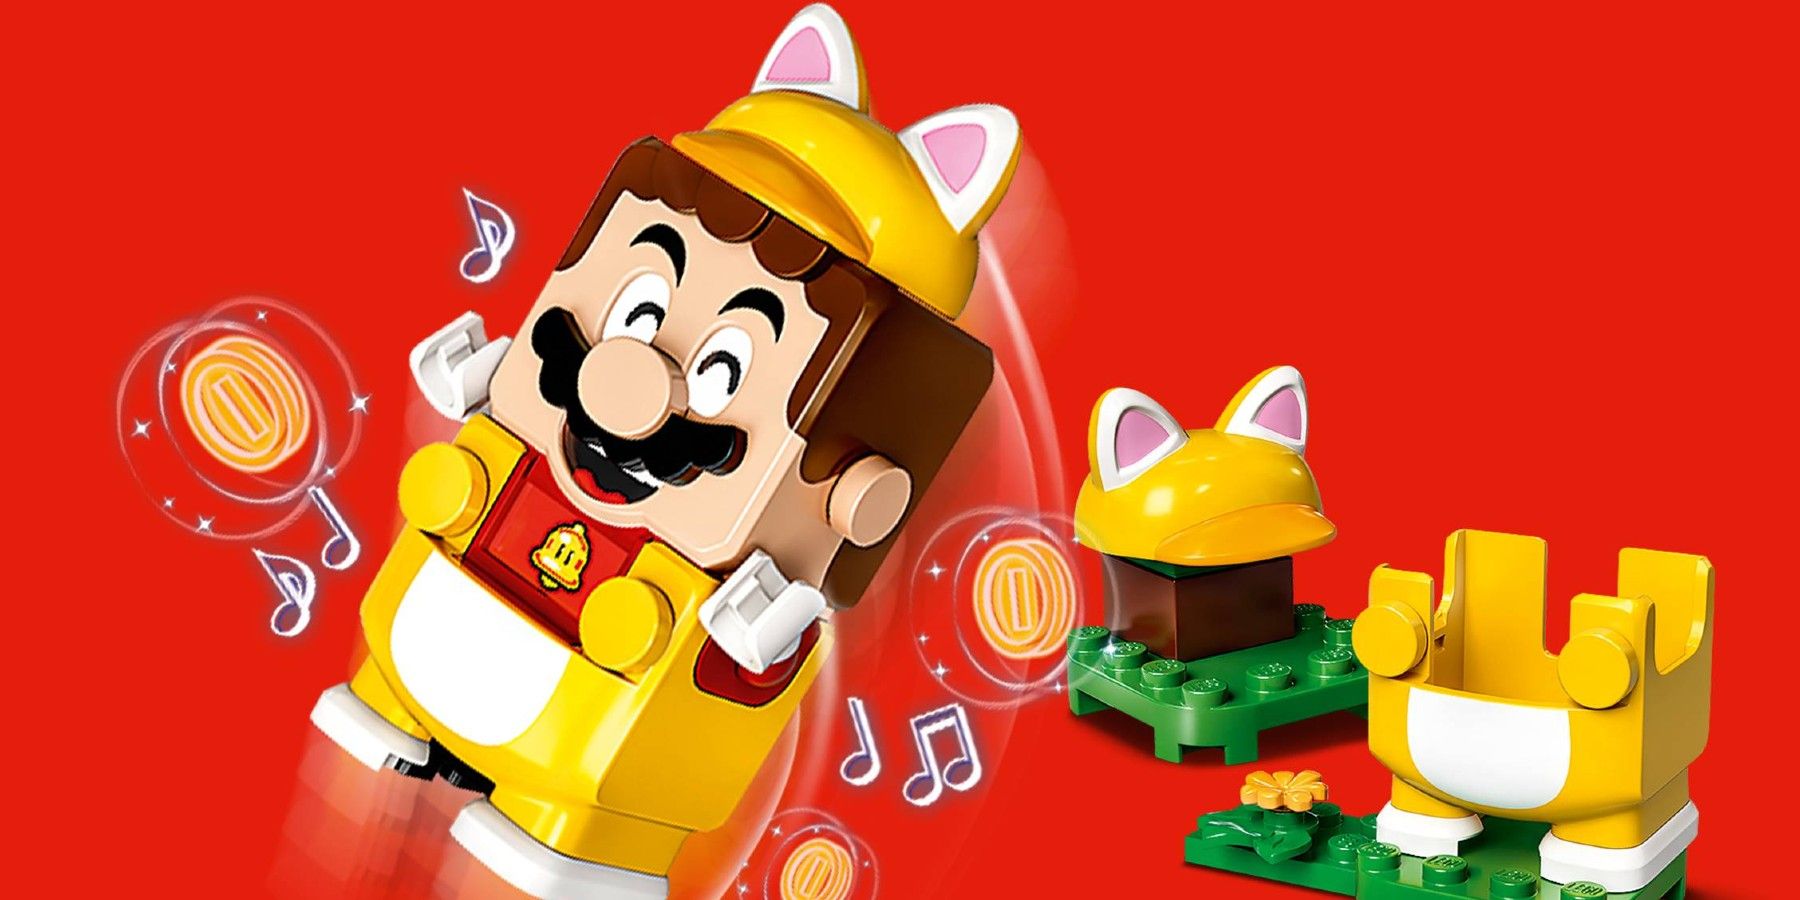 Select Lego Super Mario Sets May Be Out of Production